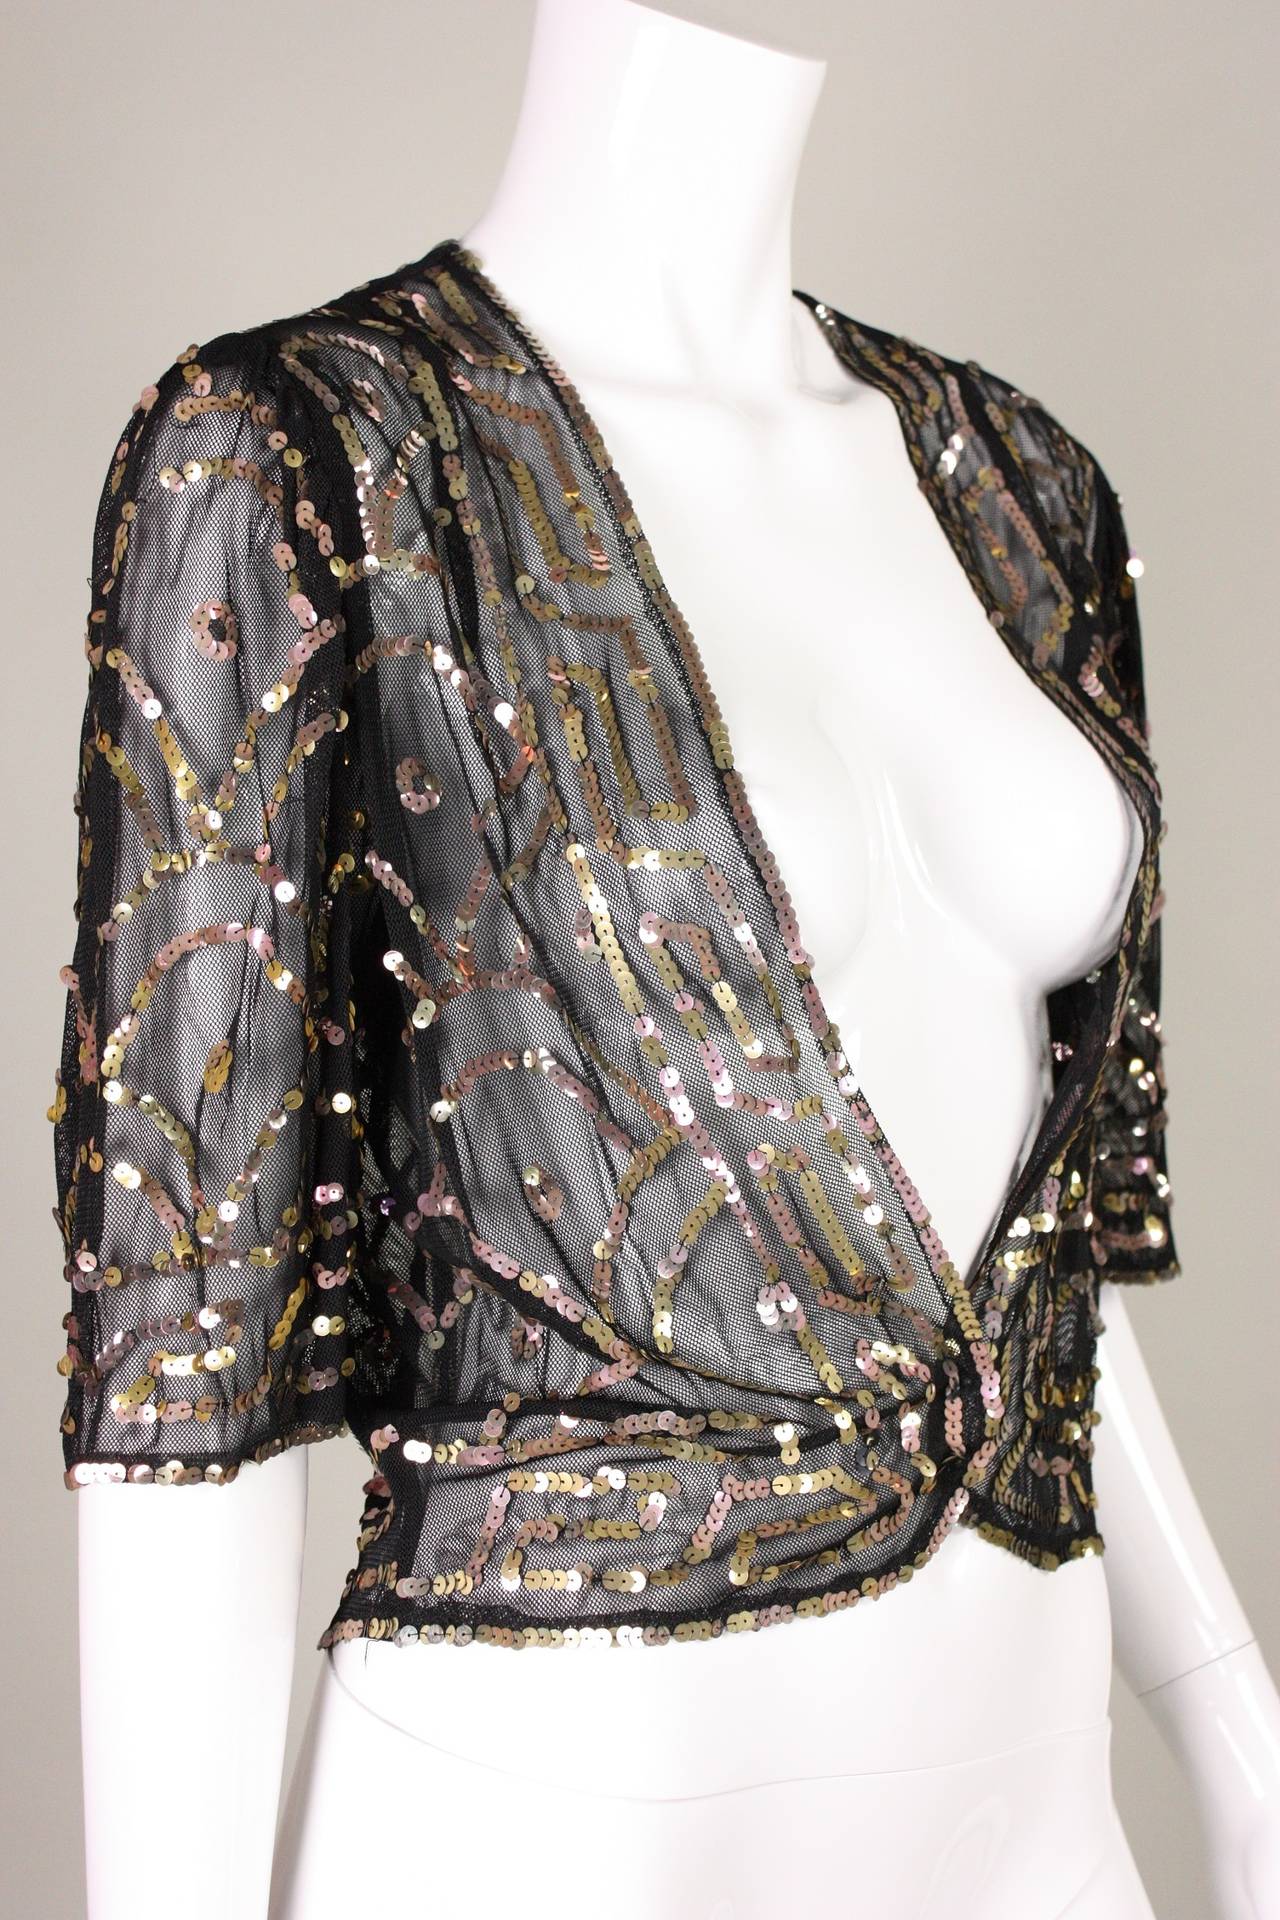 Vintage bolero dates to the 1930's and is made of soft black netting that is adorned with gold and copper colored sequins in a geometric pattern.  Short sleeves are gathered at shoulder seam.  Center front double snap closure at waist. 